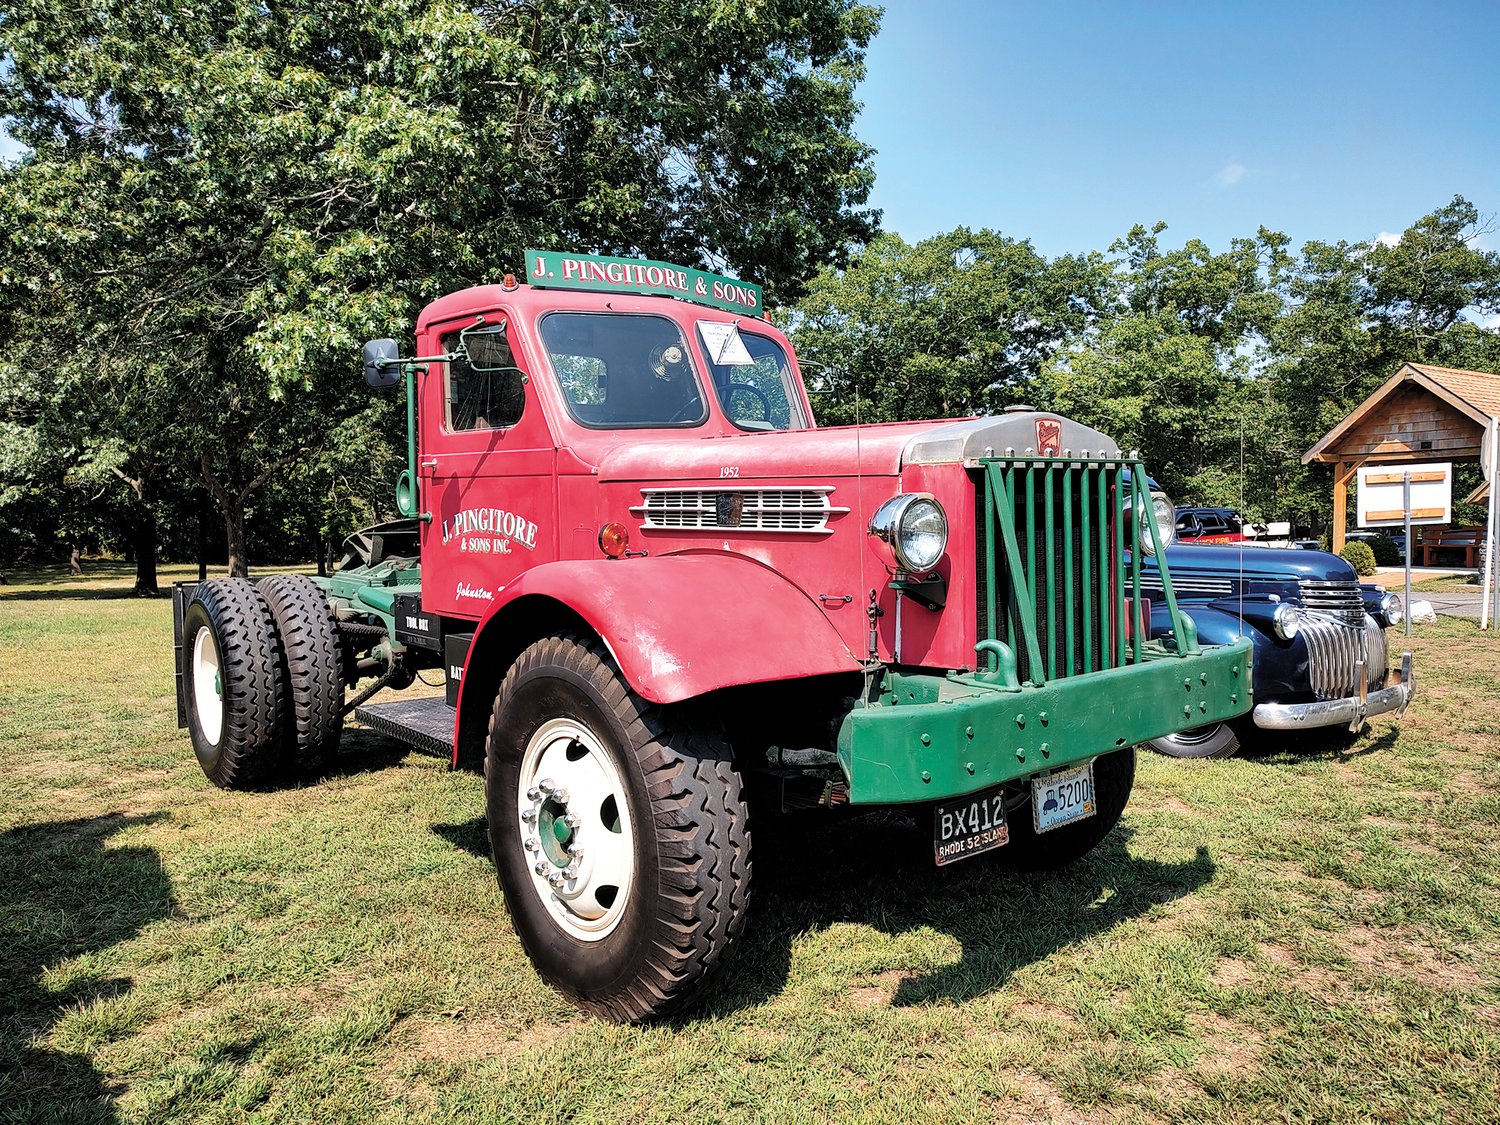 PING’S PRIDE: This is the 1952 Sterling Chain Driven Tracker Truck